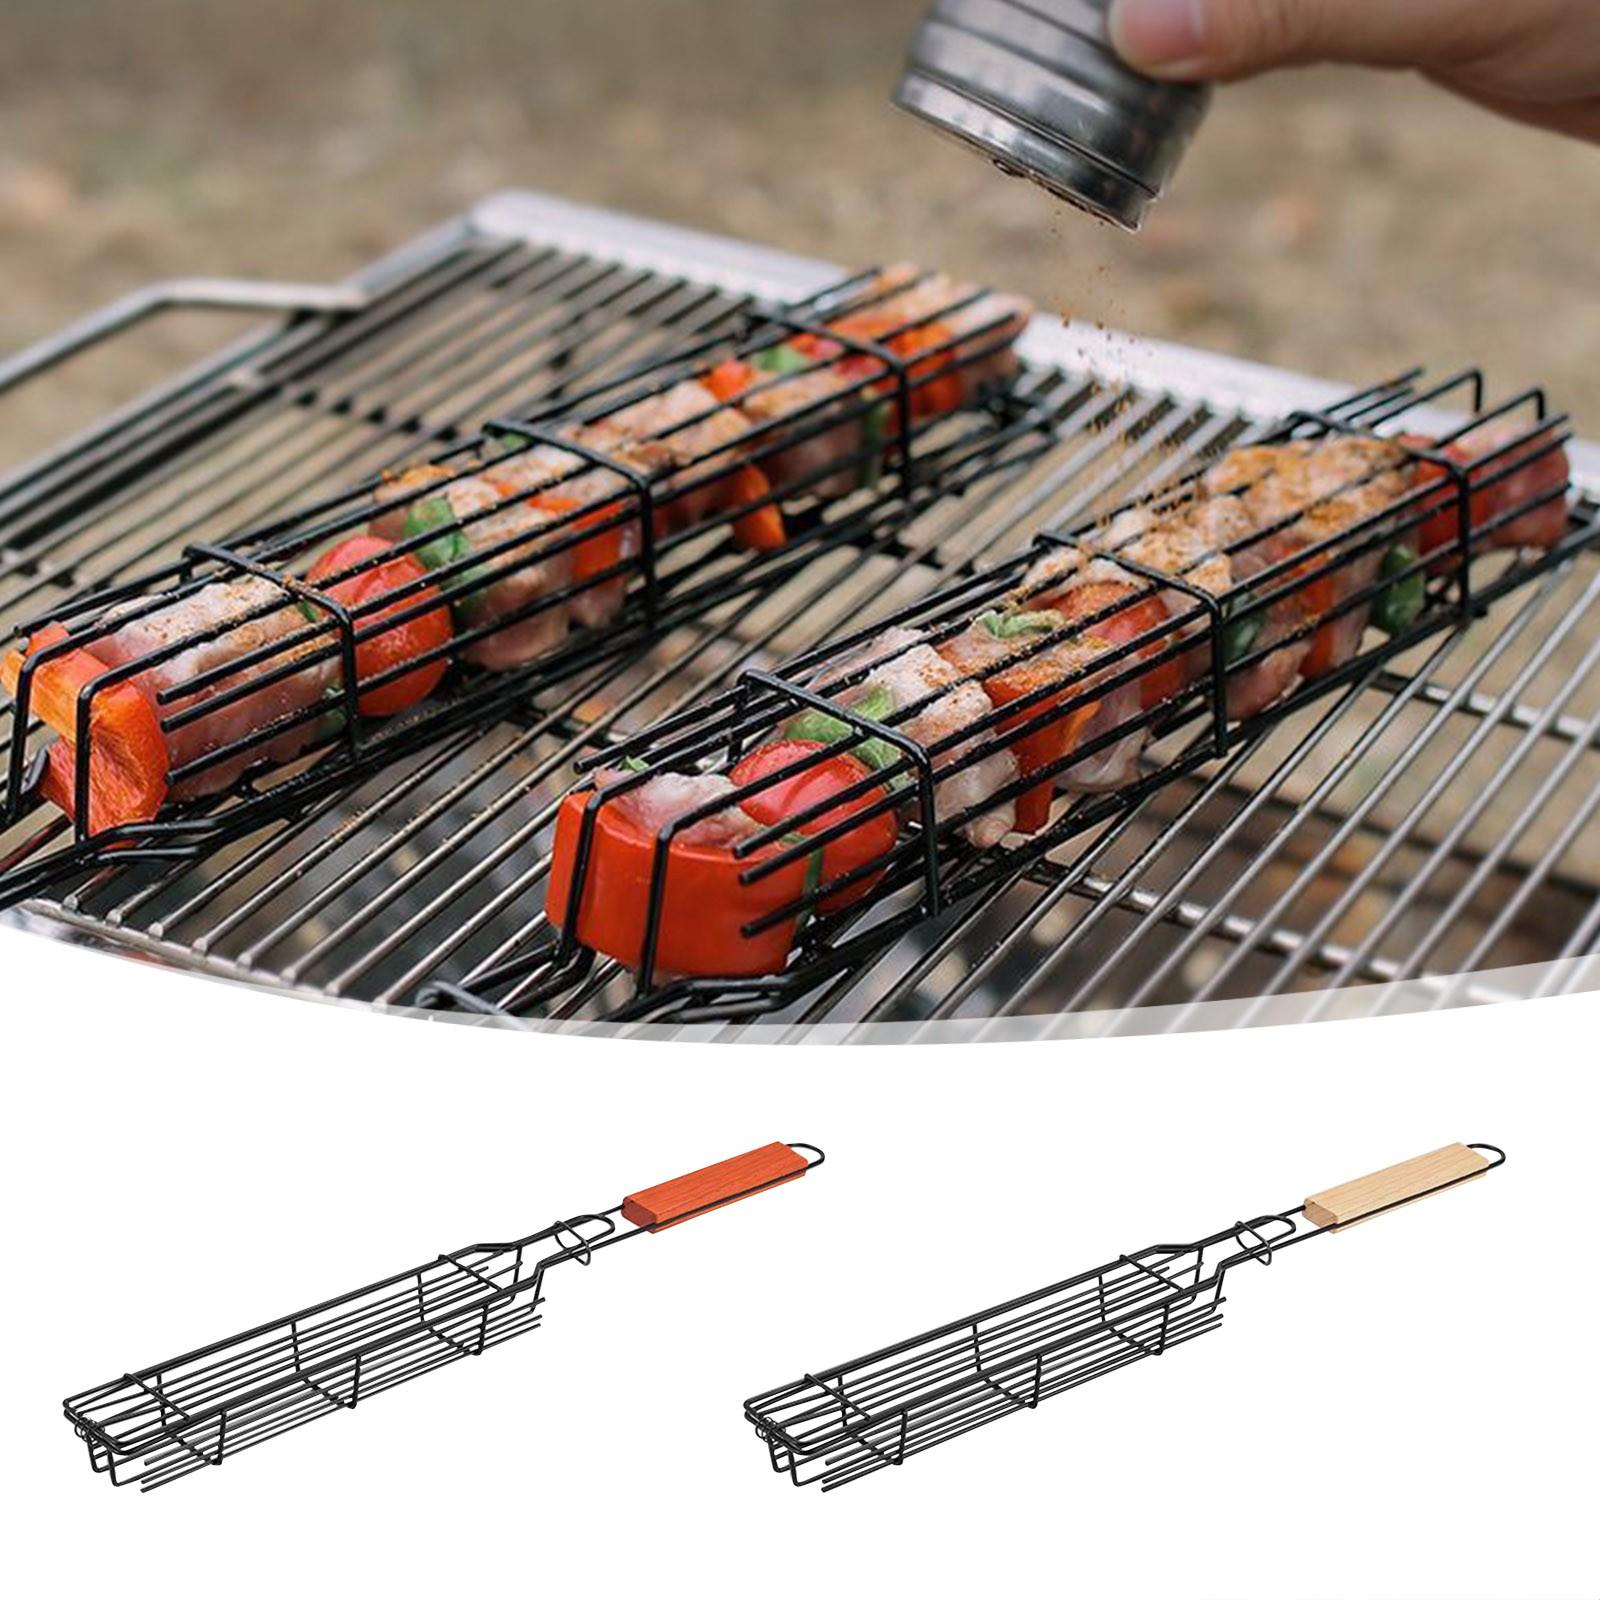 Polar Bear Outdoor Wooden Handle Barbecue CageCamping Meat And Vegetable Barbecue Grill Net RackPicnic Grilling ToolsCharcoal Sausage Racks